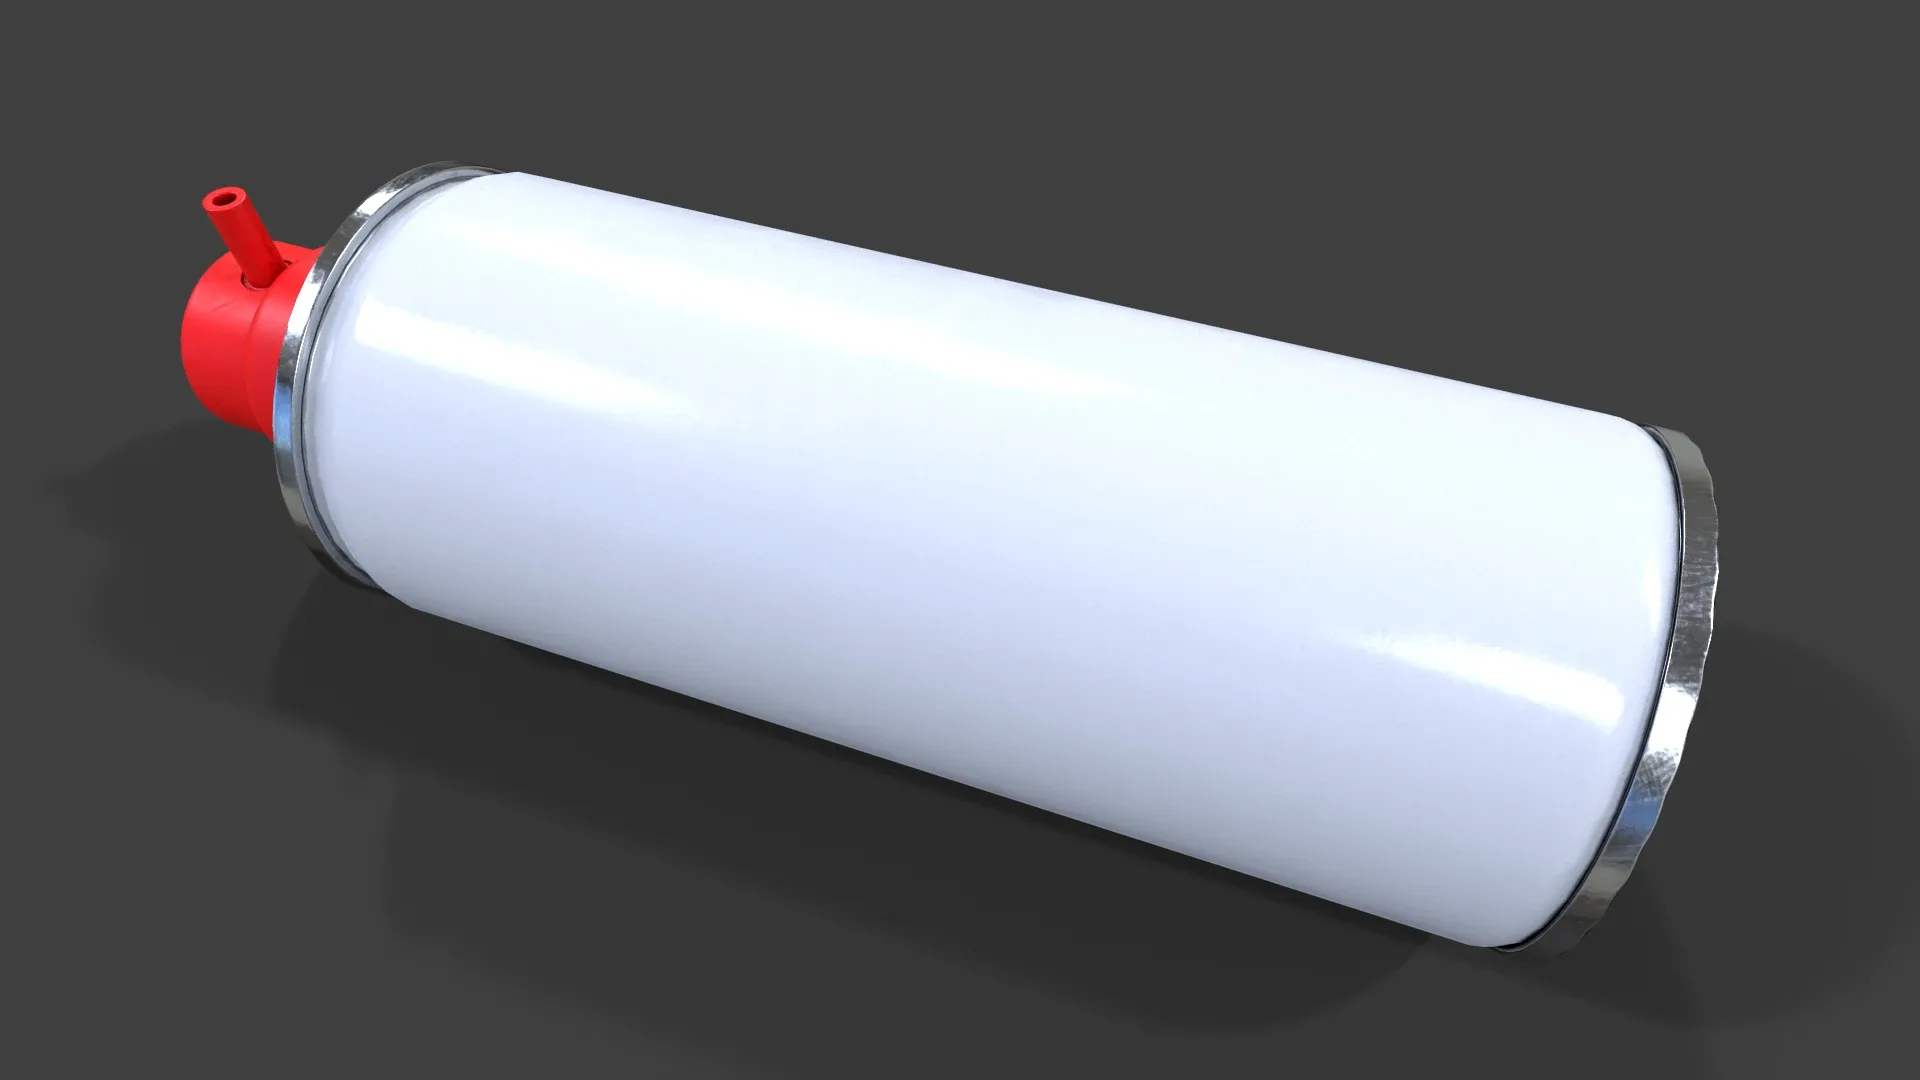 Compressed Air Can V02 - Low Poly